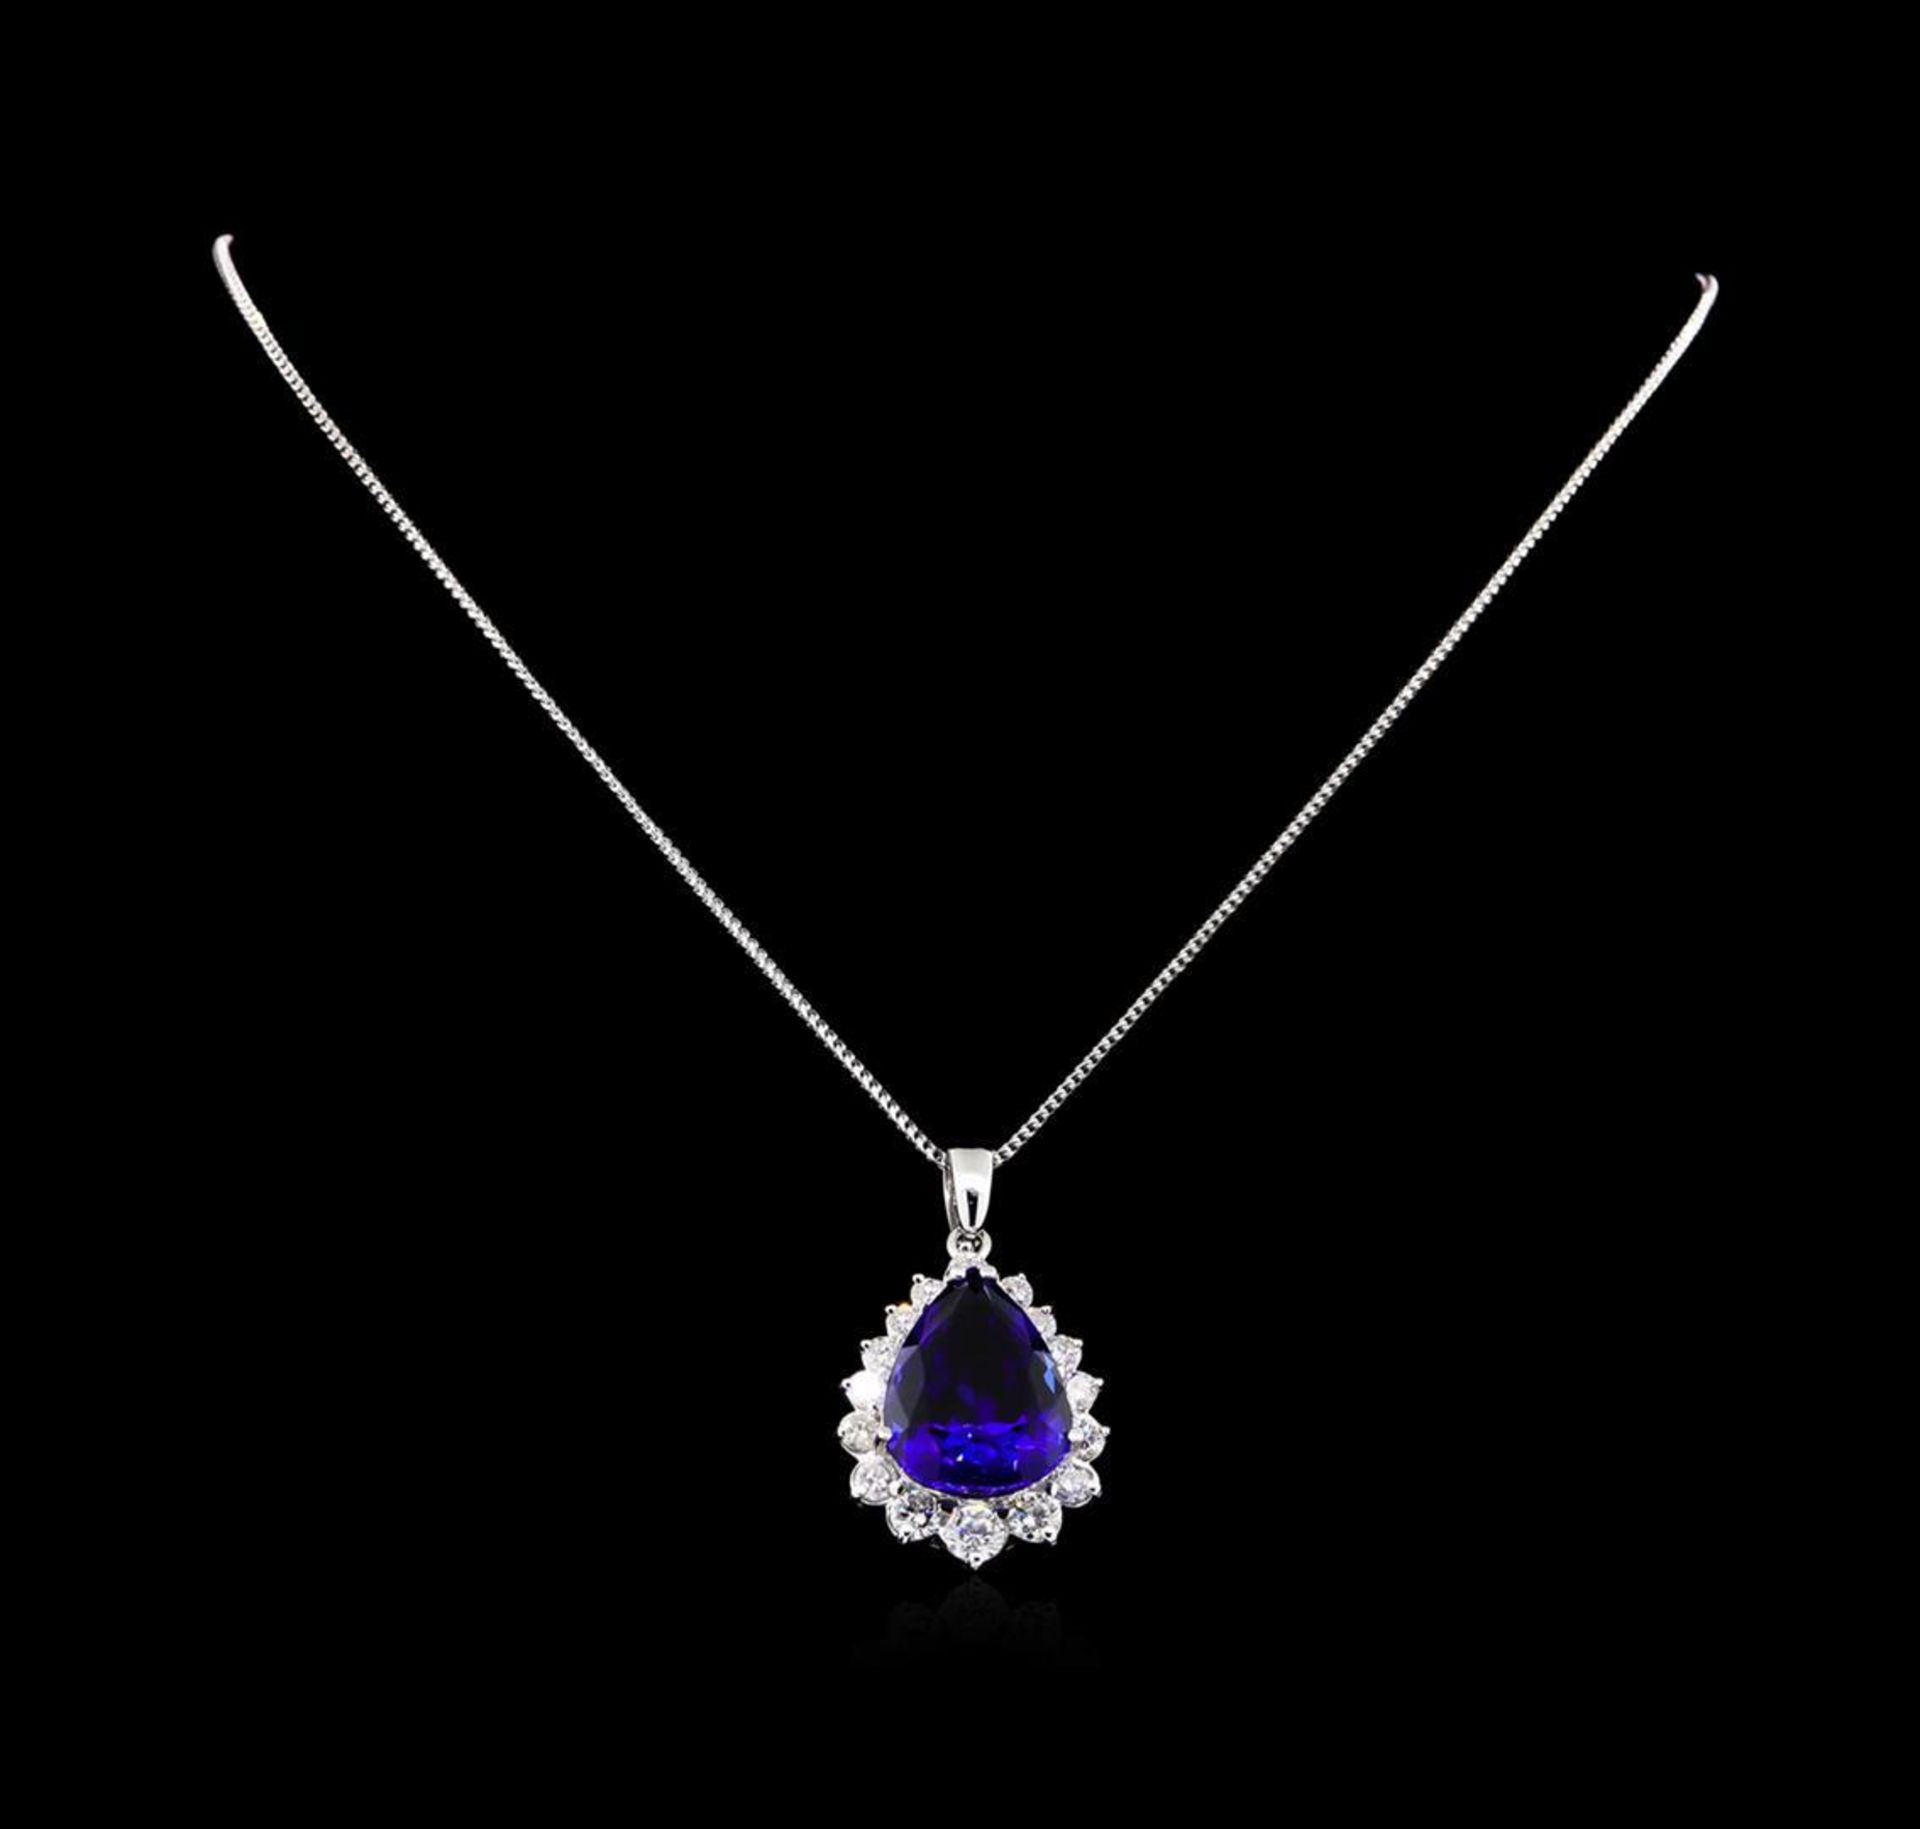 14KT White Gold GIA Certified 23.12 ctw Tanzanite and Diamond Pendant With Chain - Image 2 of 5